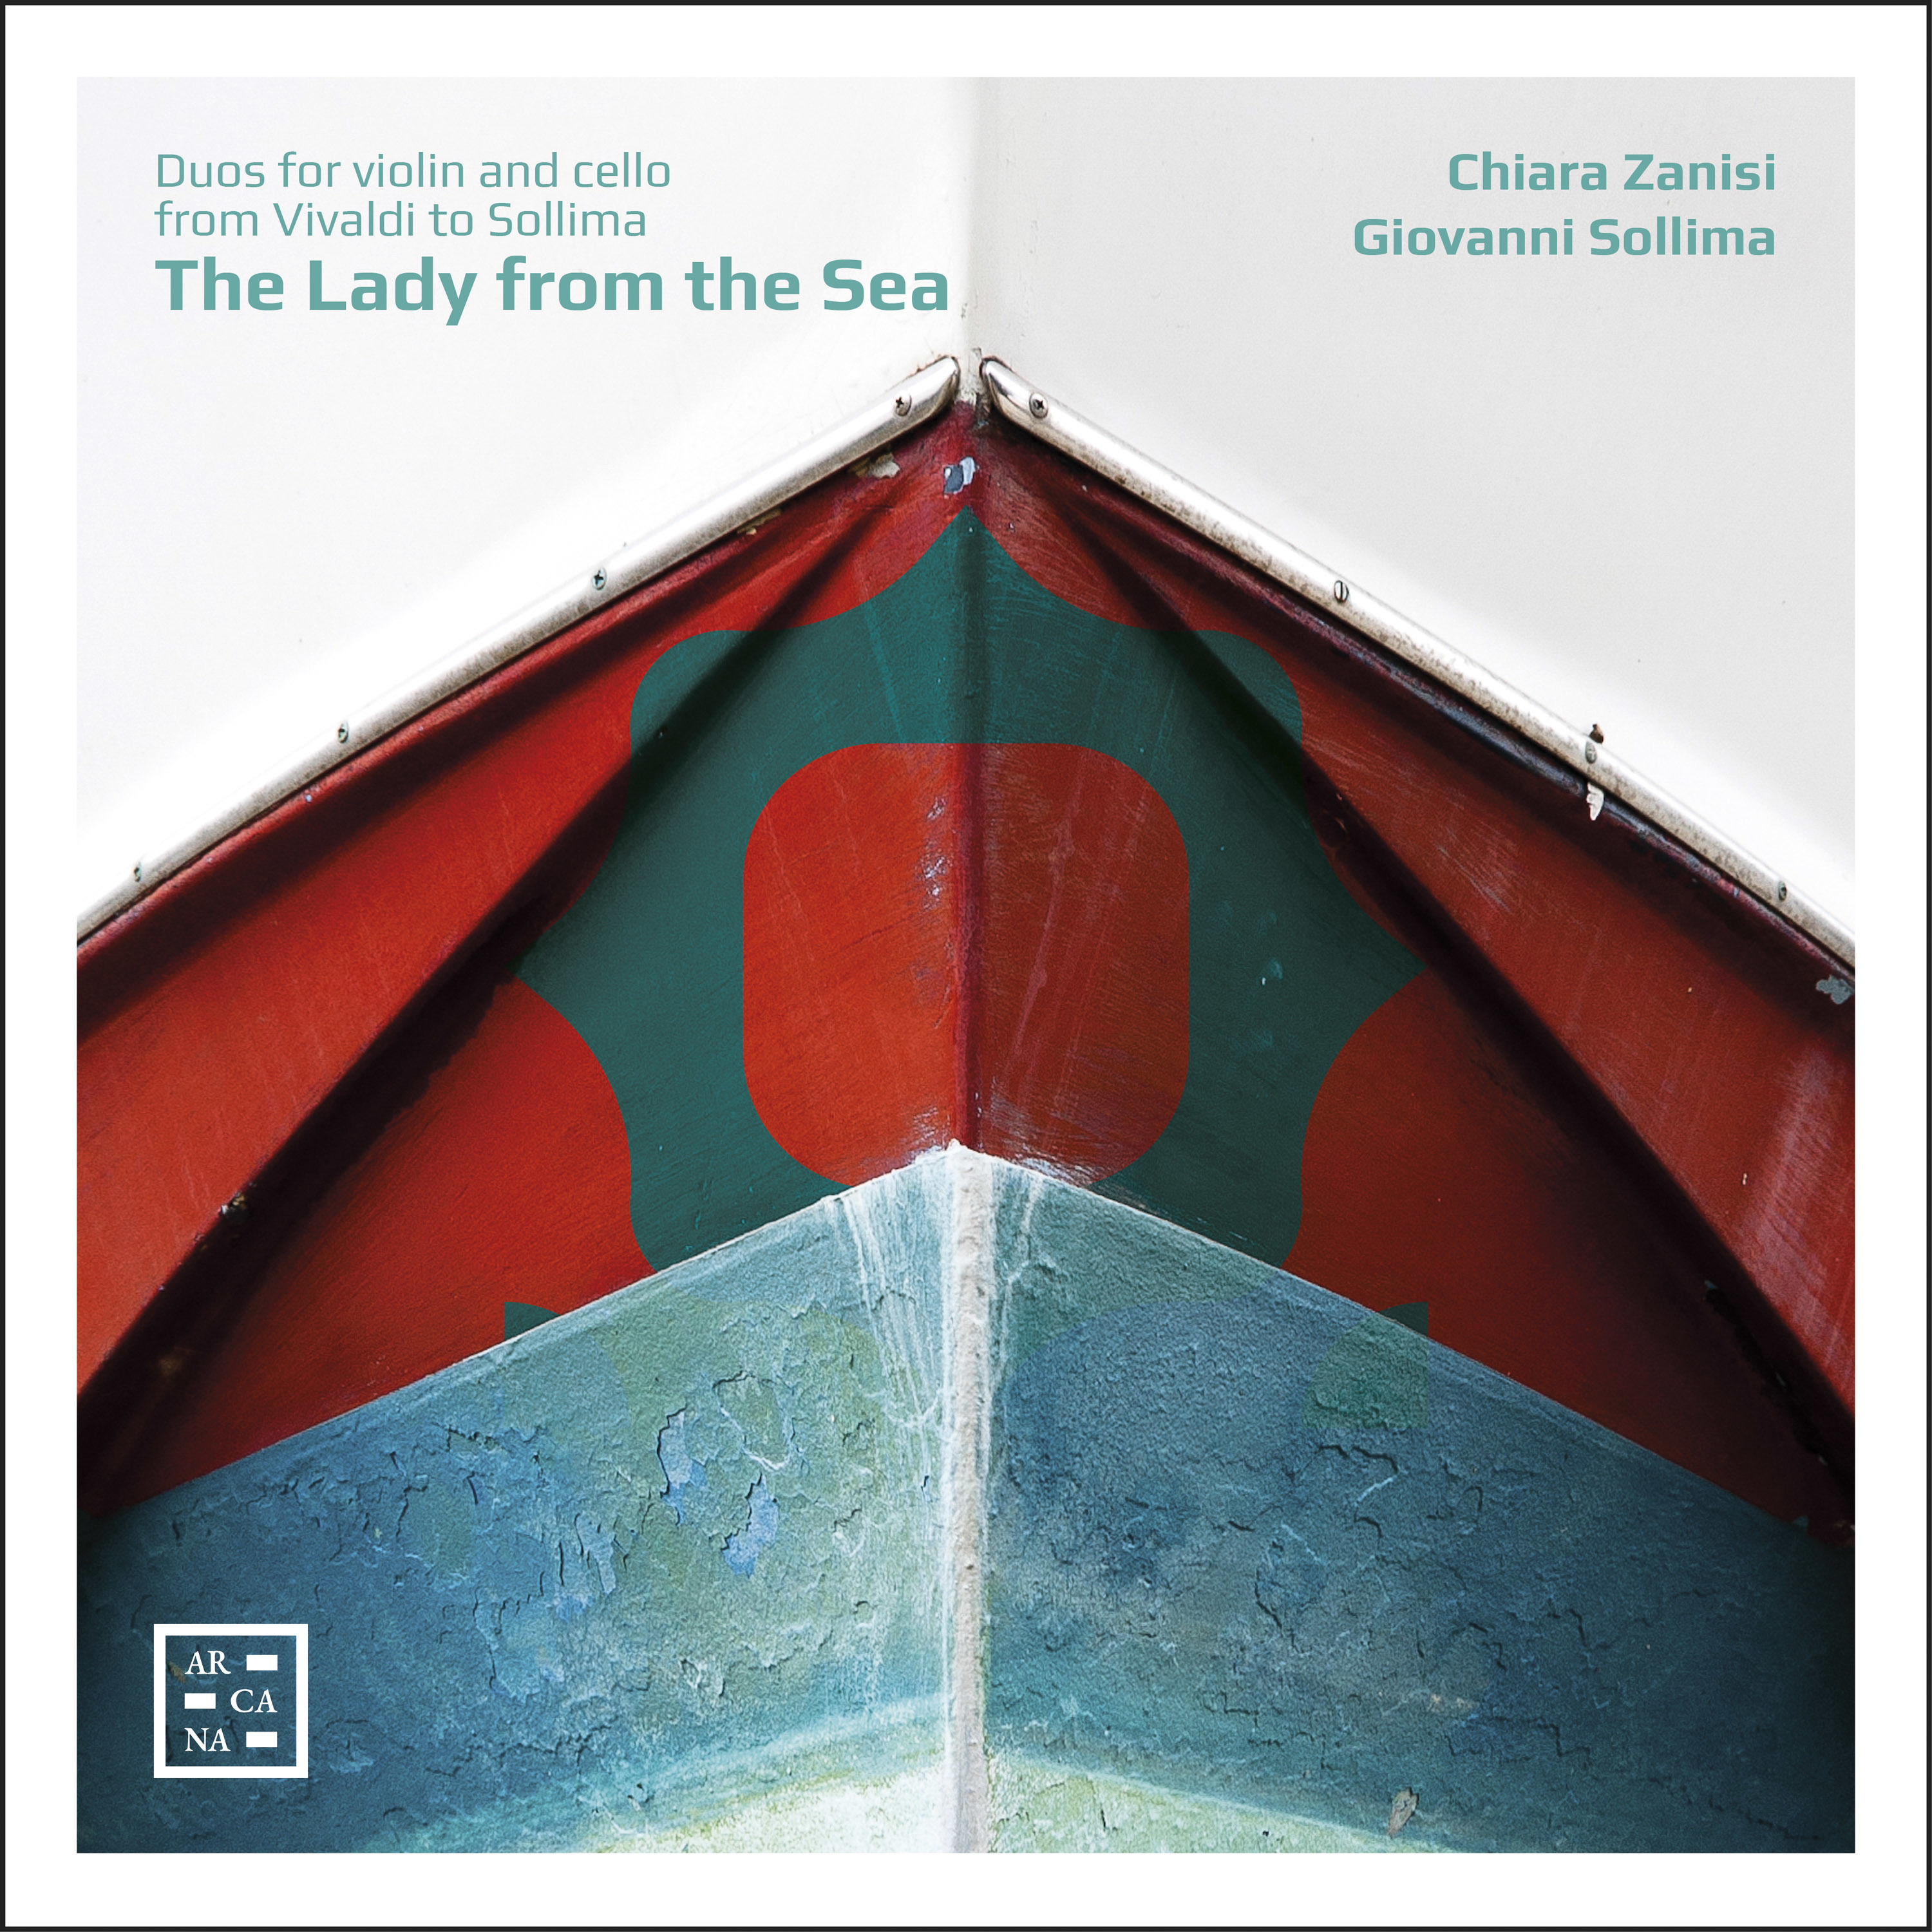 Chiara Zanisi & Giovanni Sollima - The Lady from the Sea: Duos for Violin and Cello from Vivaldi to Sollima (2020) [FLAC 24bit/96kHz]